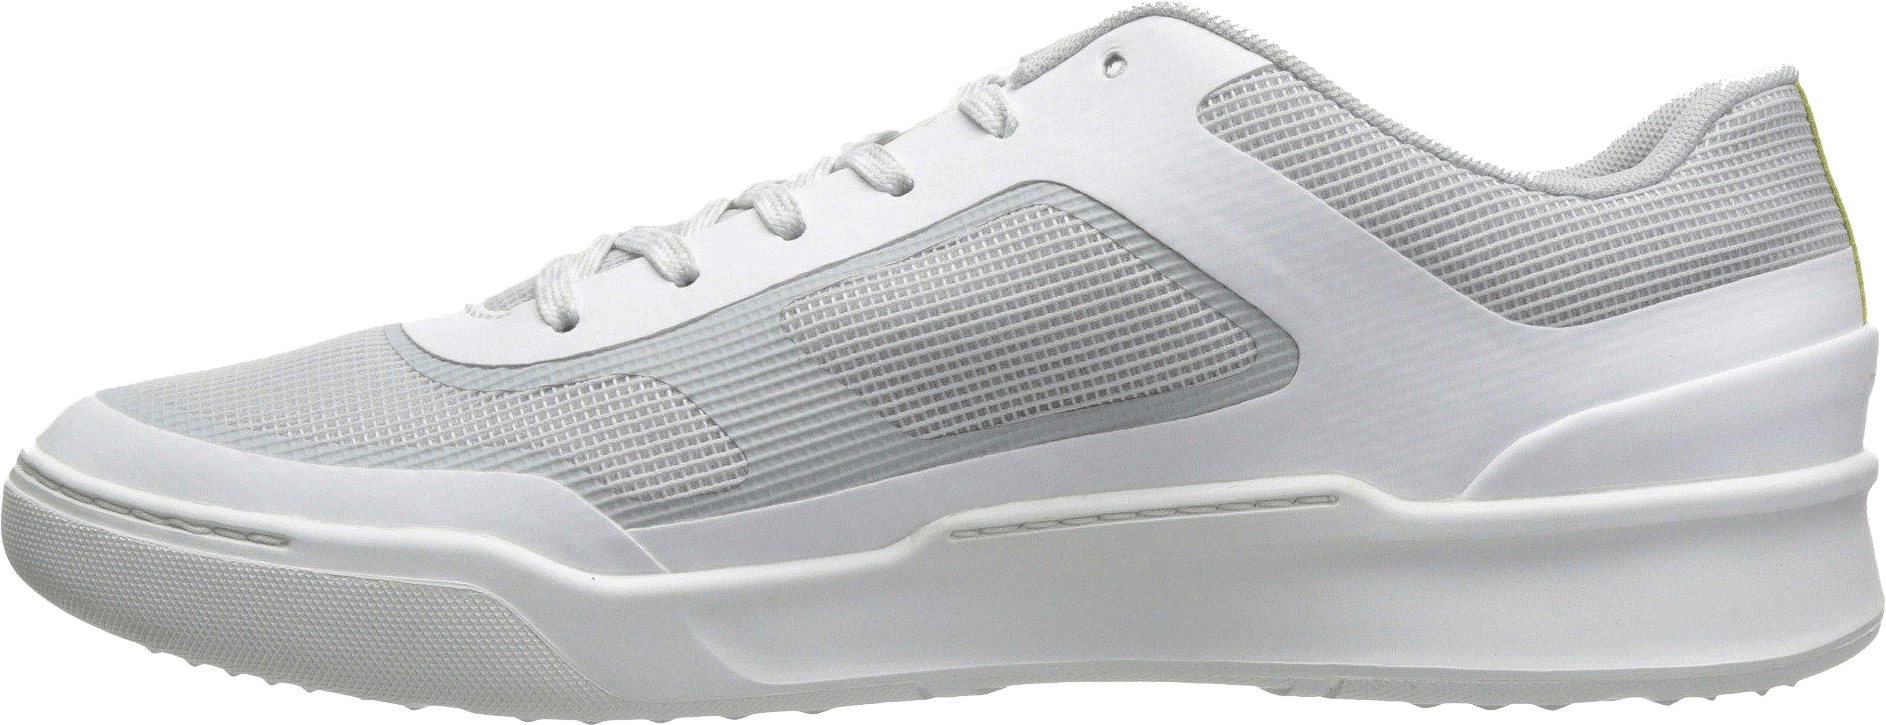 Best Selling Tennis Shoes – Holabird Sports